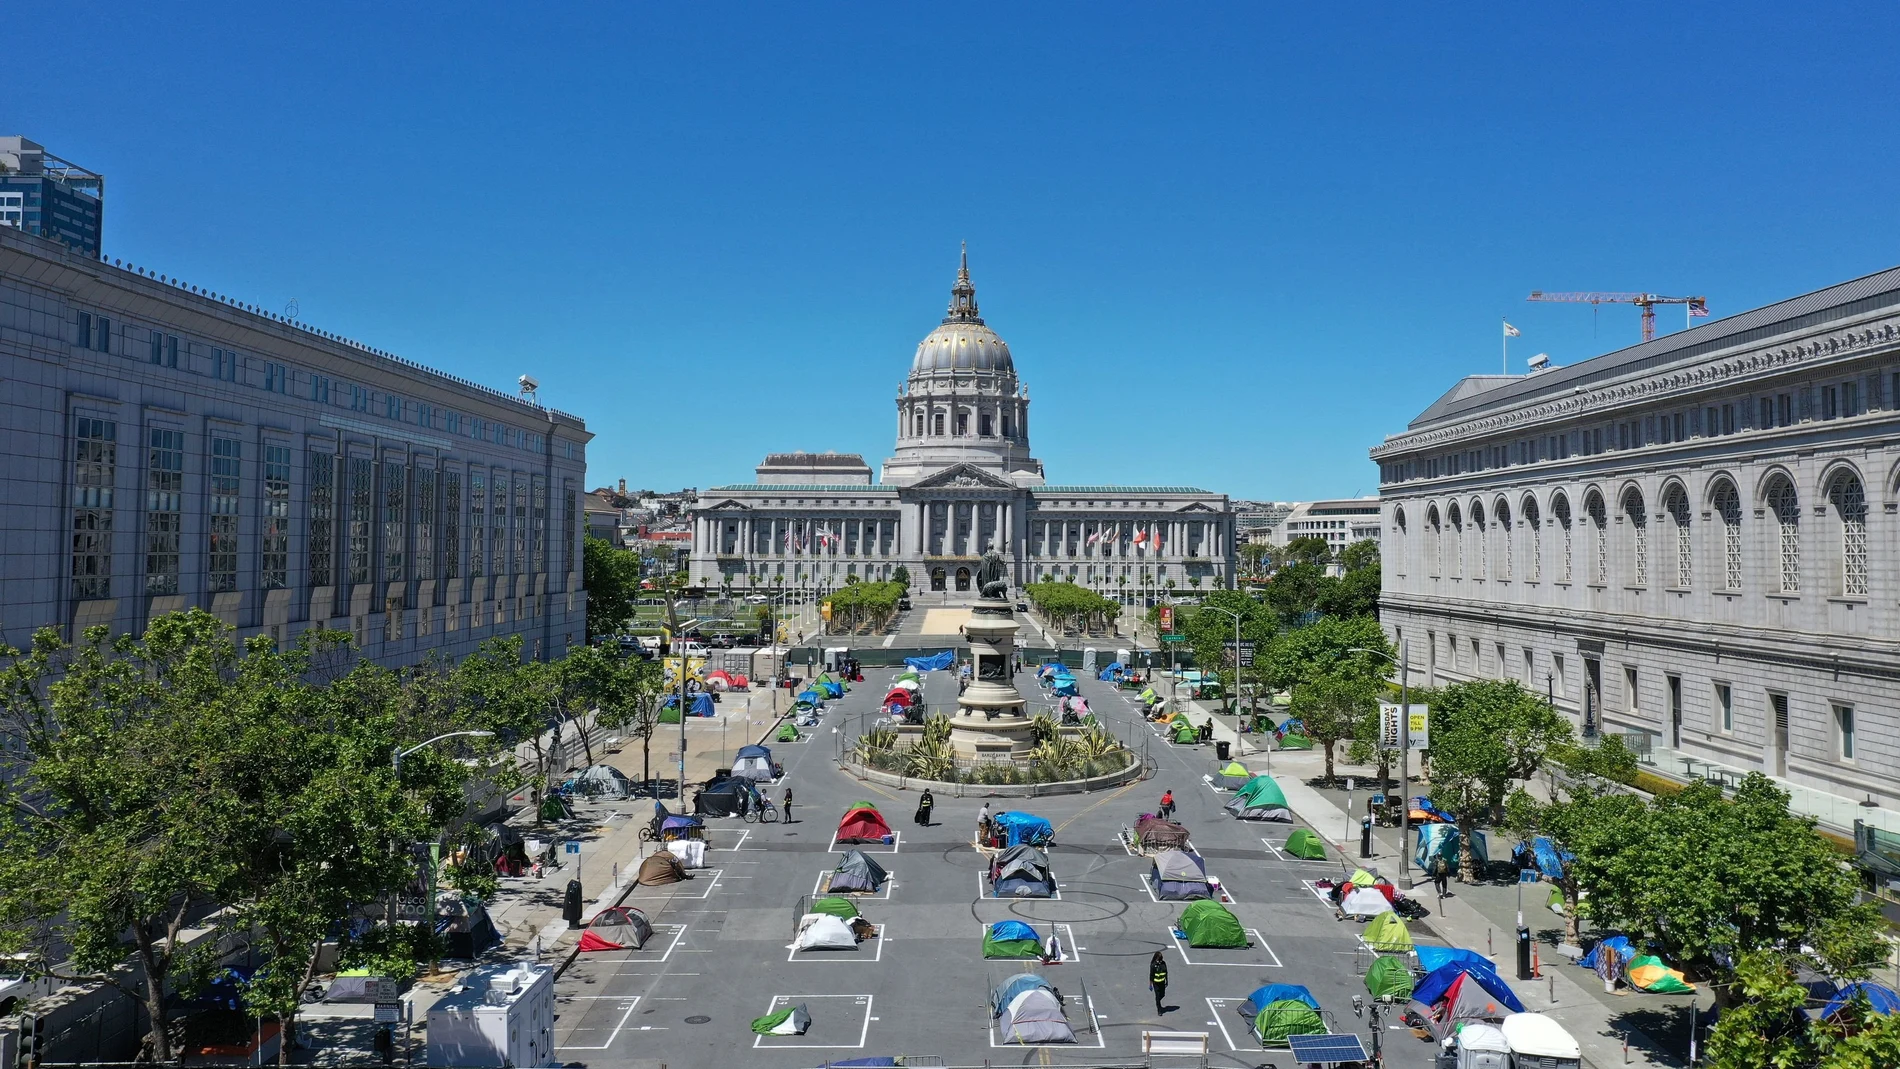 Tents are pitched using social distancing to help slow the spread of coronavirus disease (COVID-19) at a homeless encampment in a square next to city hall in San Francisco